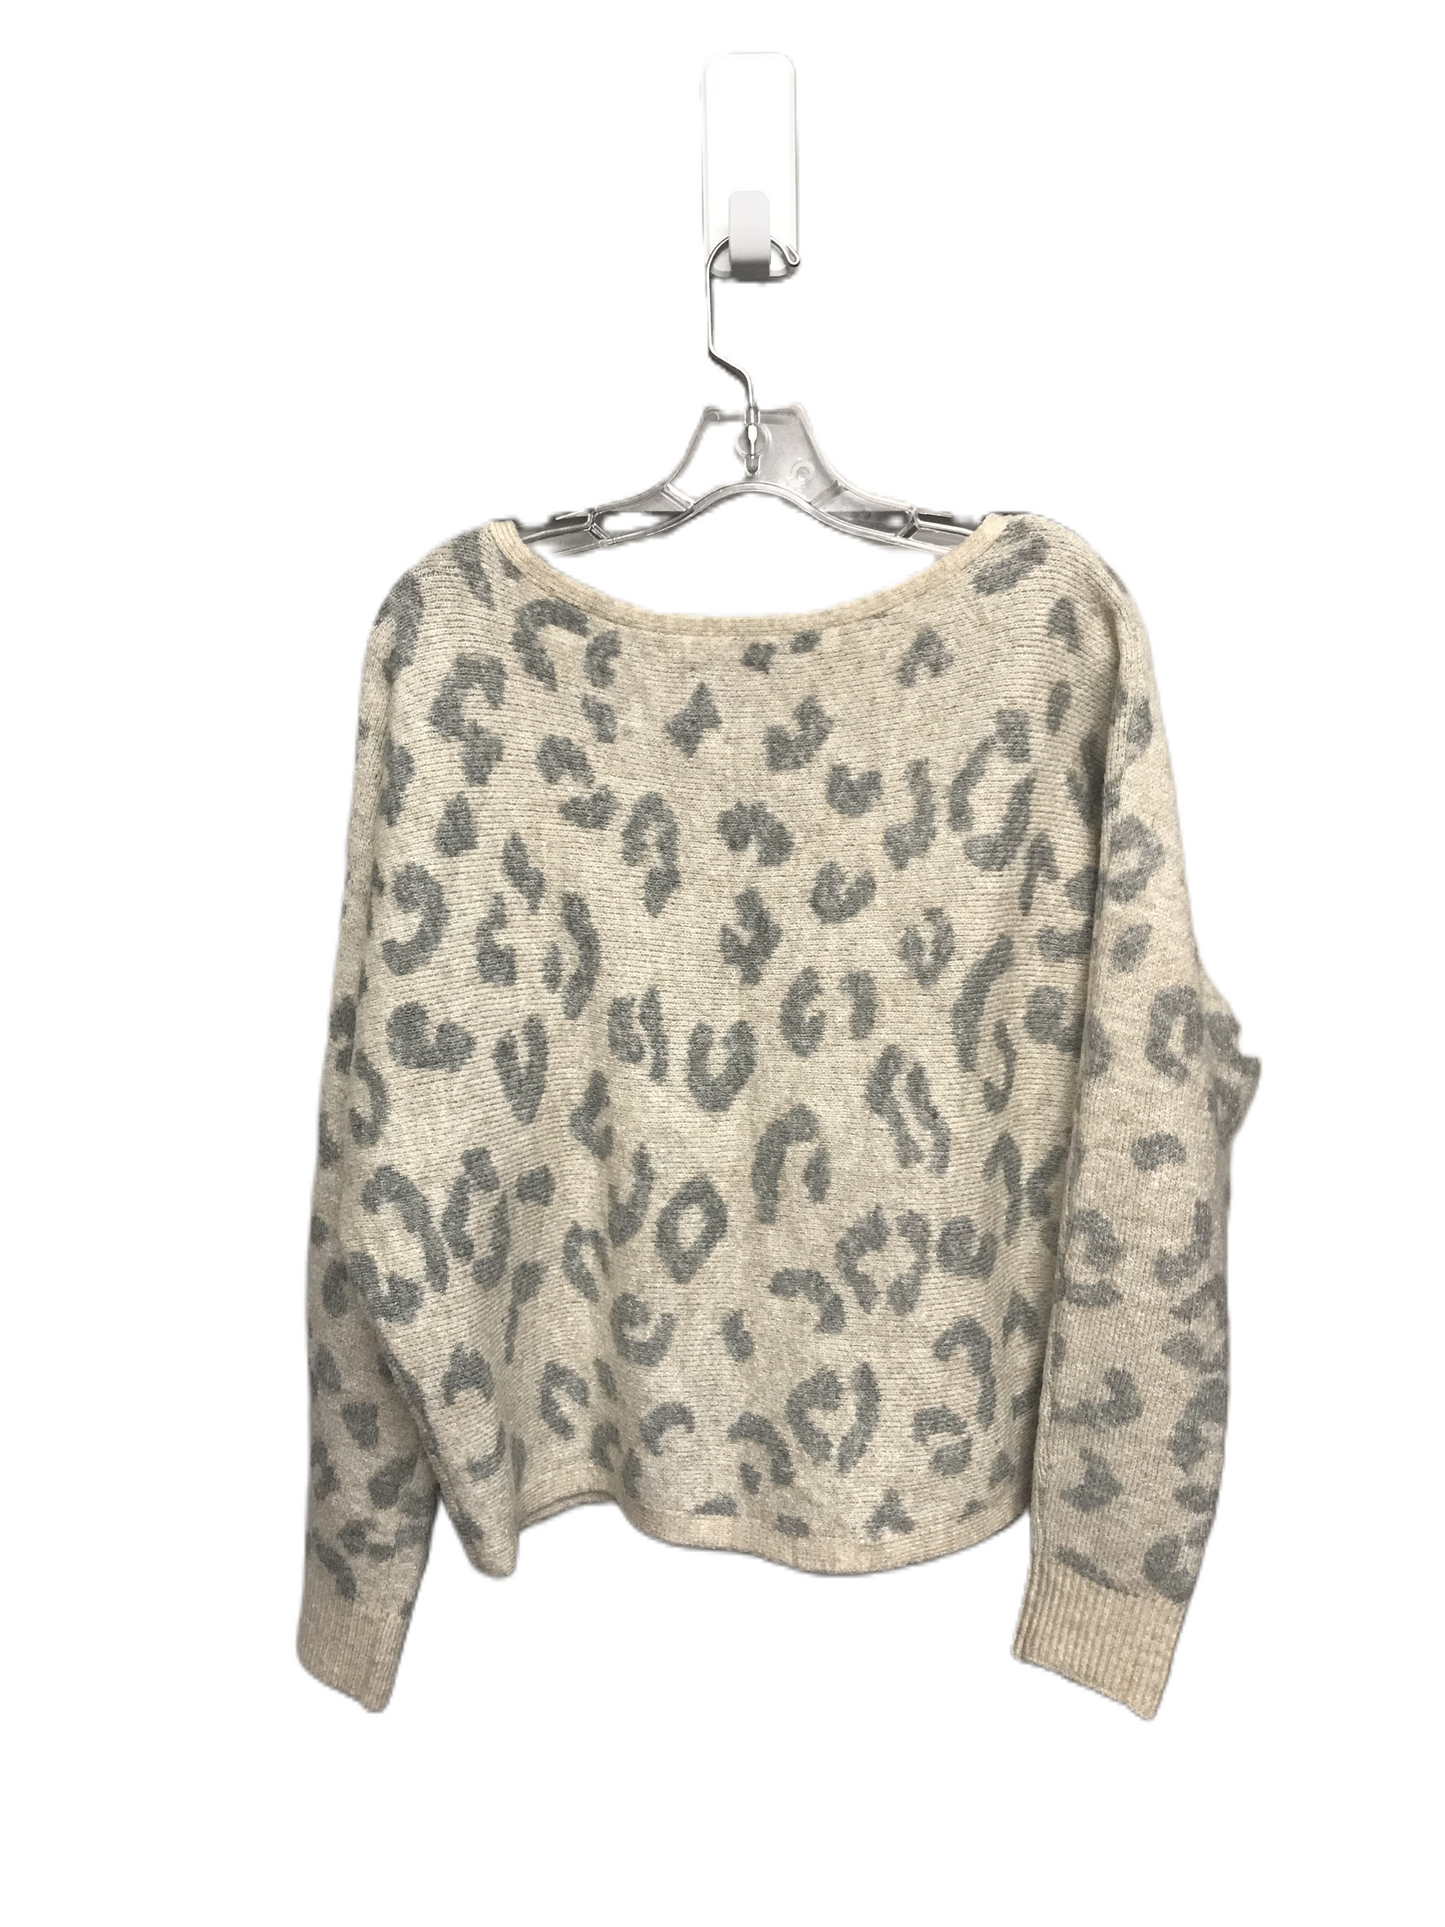 Tan Sweater By Abercrombie And Fitch, Size: M